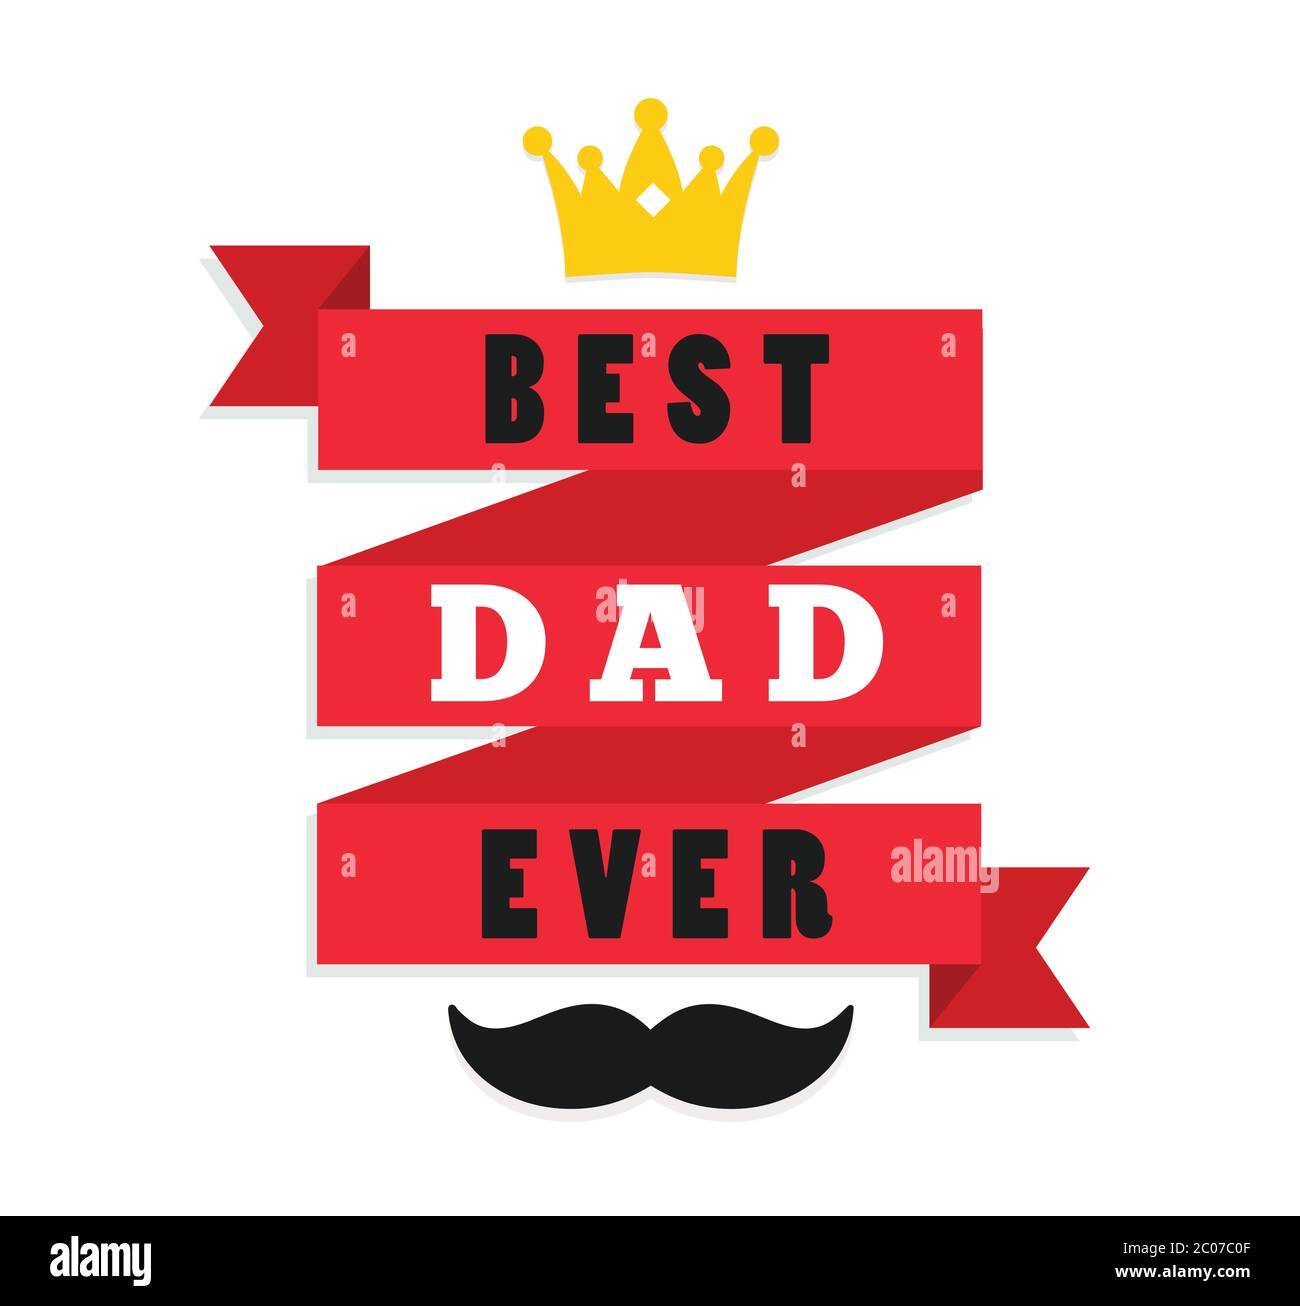 Best dad ever typography background.Happy father's day background Vector illustration. Happy Father Day Card,design for greeting card, poster, banner. Stock Vector